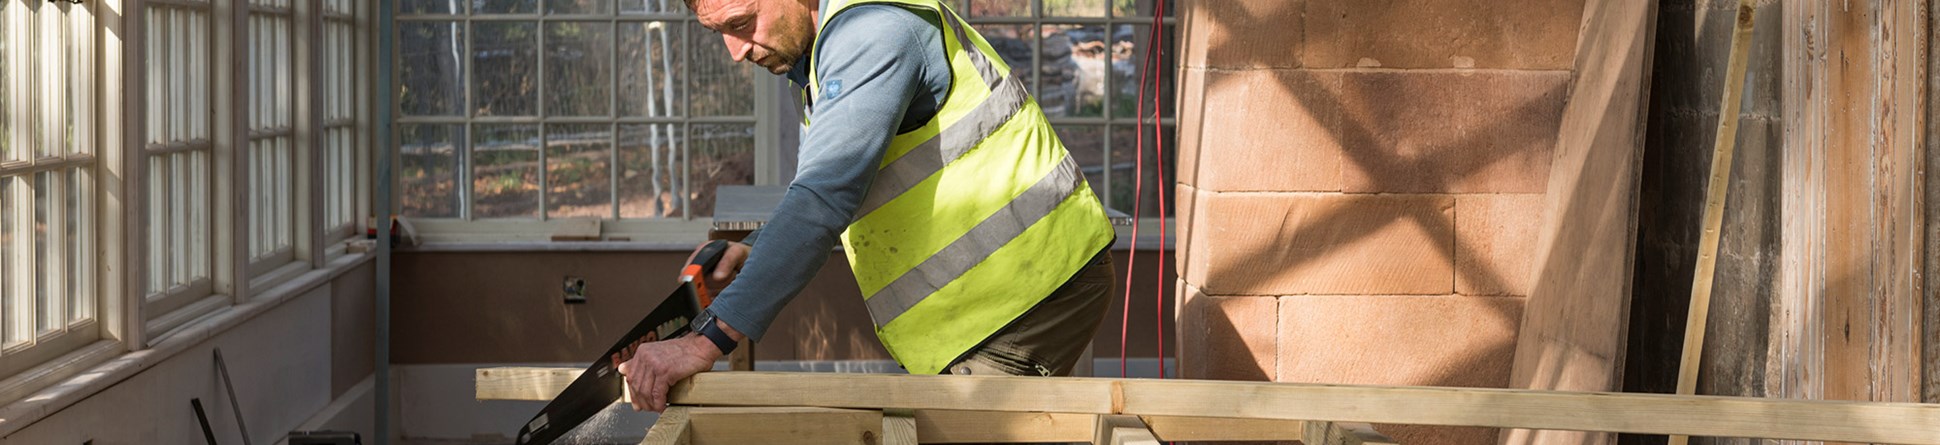 Man in a conservatory undergoing renovation. He is wearing a high-vis waistcoat and sawing a length of wood balanced on a frame made from the same wood.